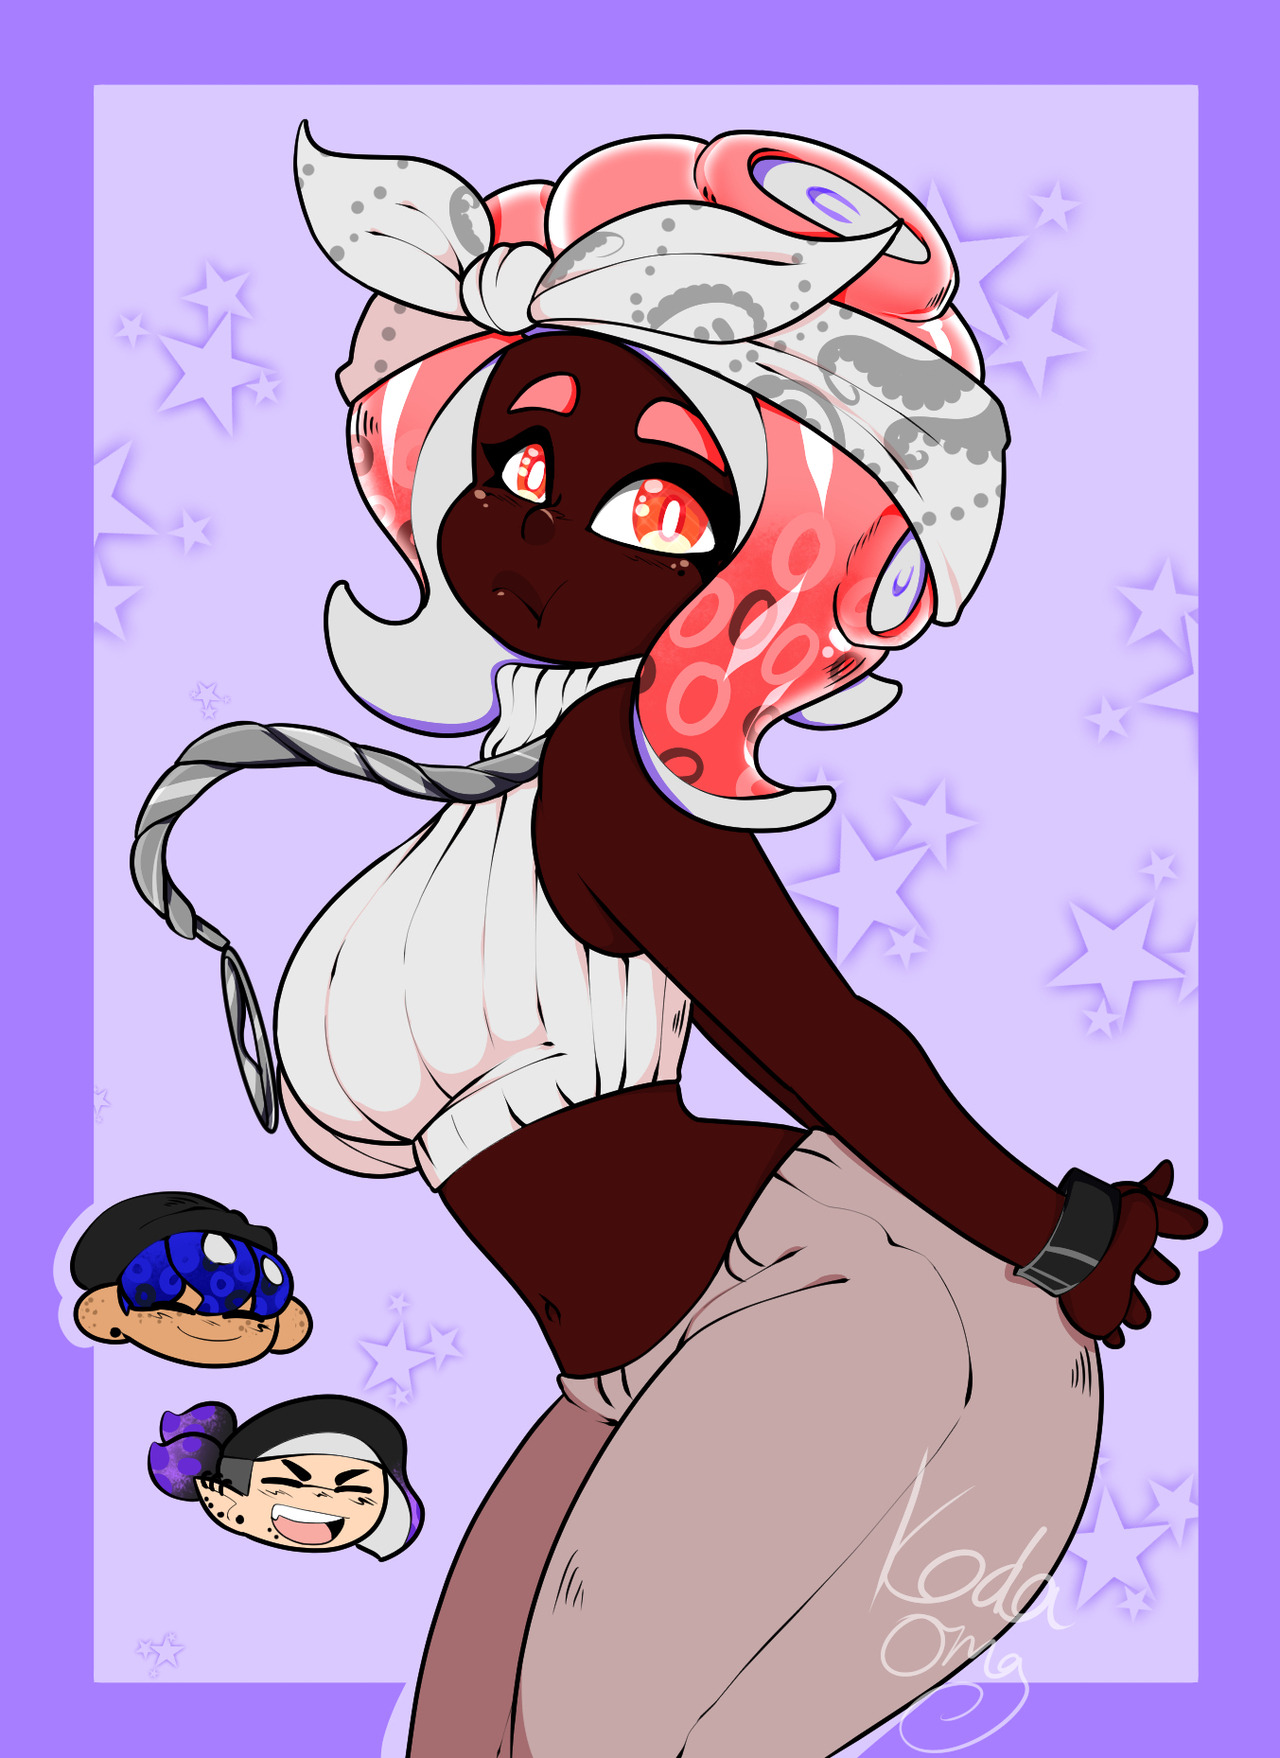 kodaoma:Drew my baby girl in Marina’s Octo Expansion outfit, and she is rocking